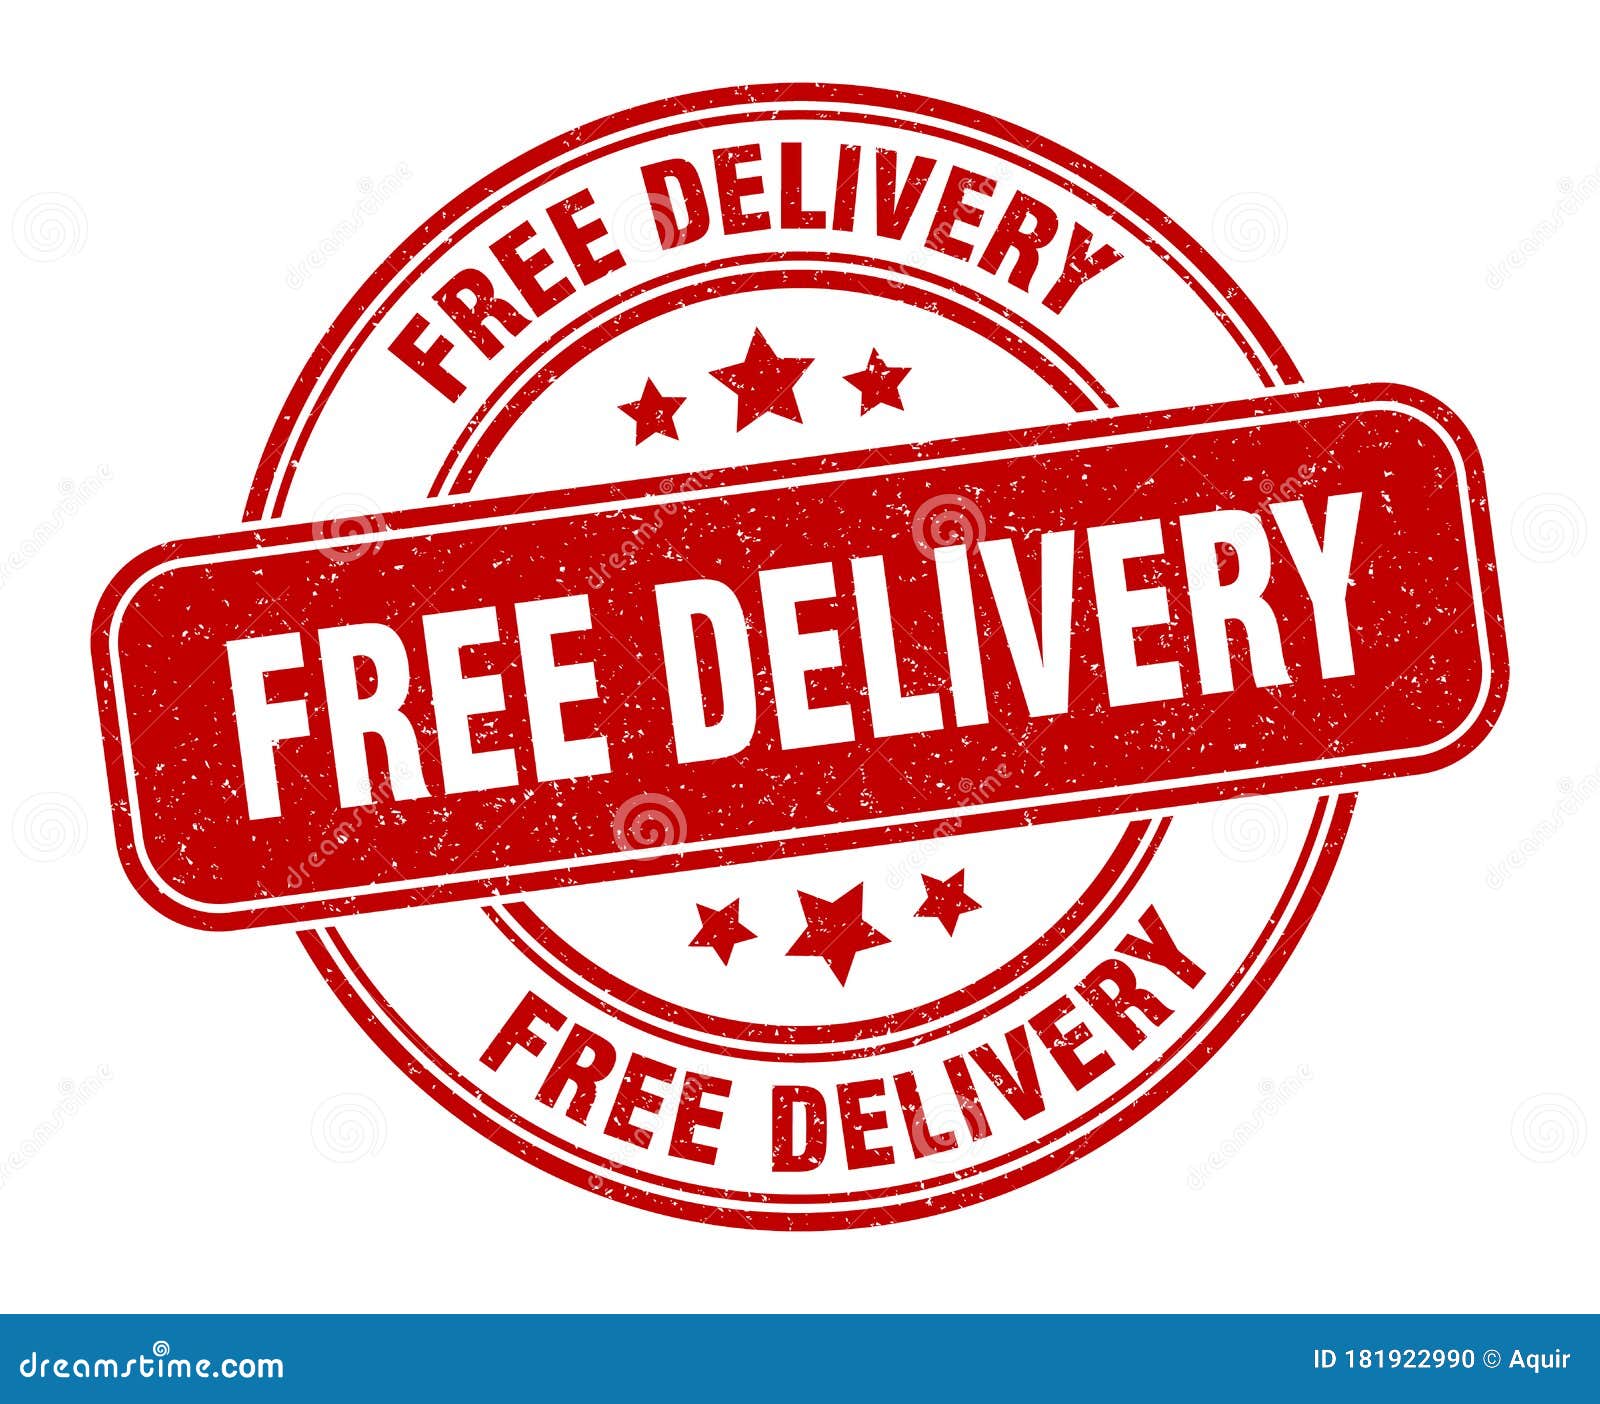 Free Delivery Stamp. Free Delivery Round Grunge Sign Stock Vector ...